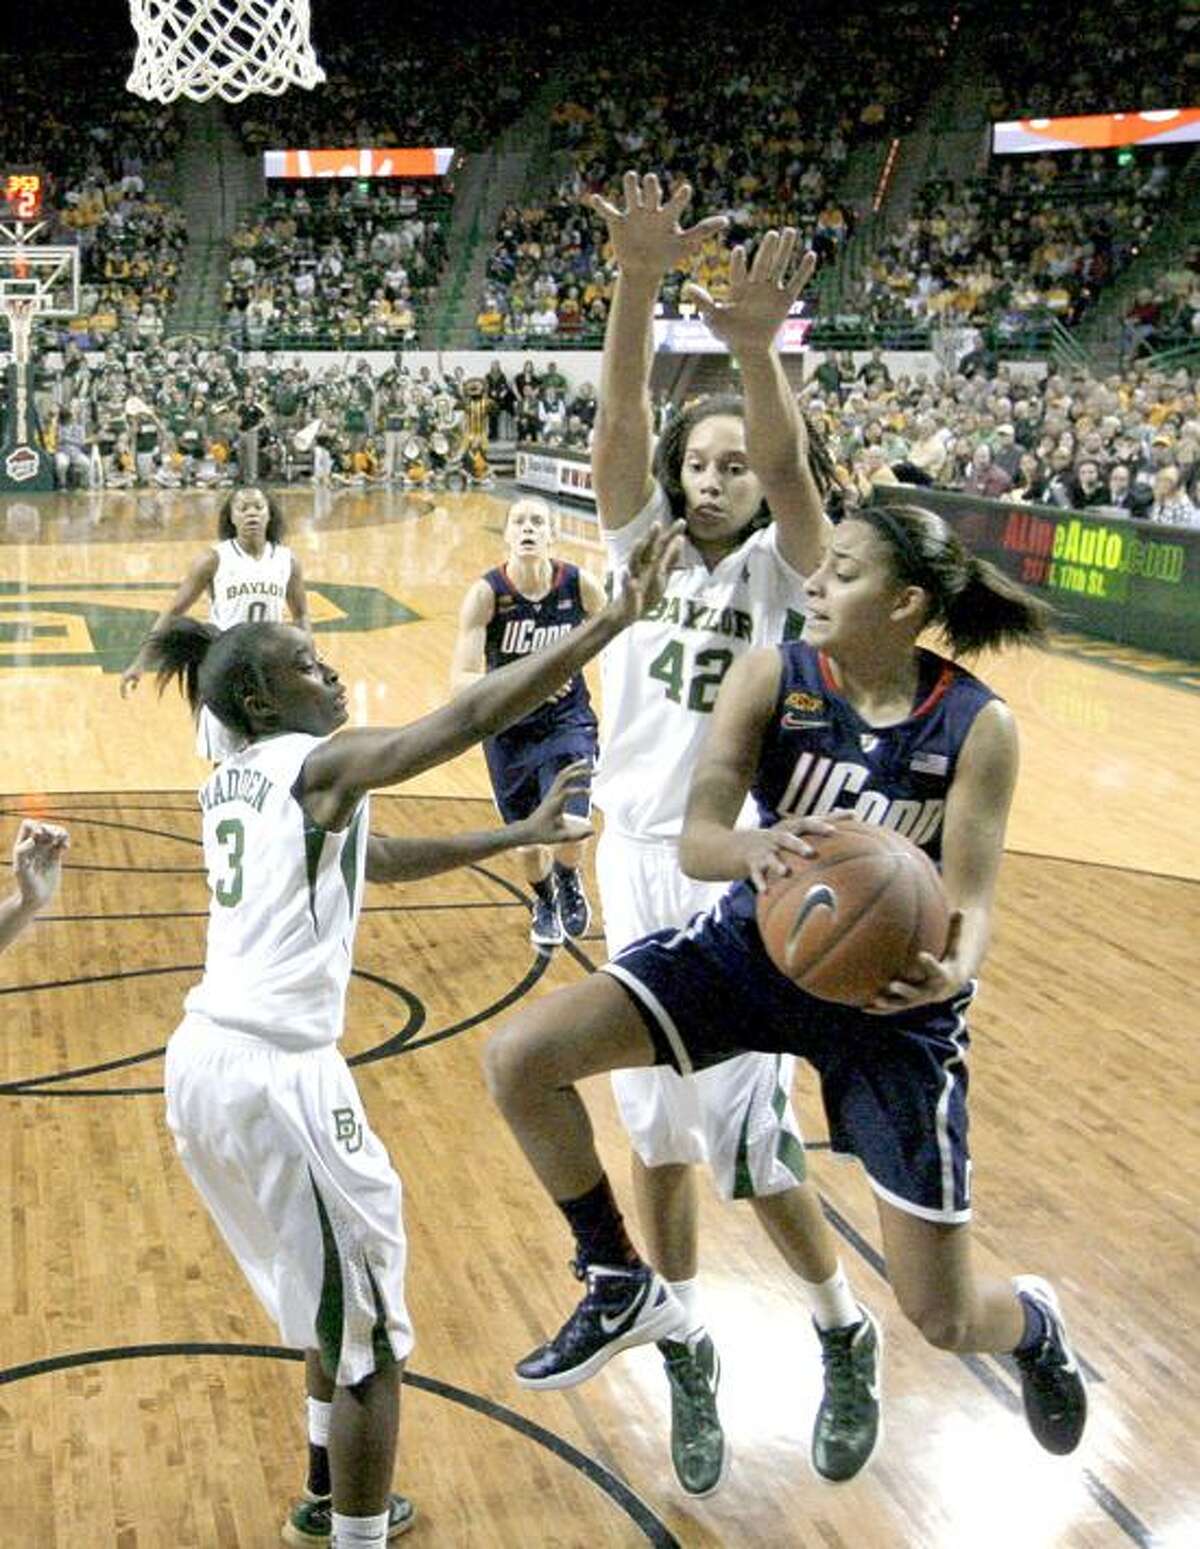 Baylor guard Jordan Madden (3) and Brittney Griner (42) combine to stop a drive to the basket by Connecticut guard Bria Hartley, front, in the first half of an NCAA college basketball game Sunday, Dec. 18, 2011, in Waco, Texas. (AP Photo/Tony Gutierrez)